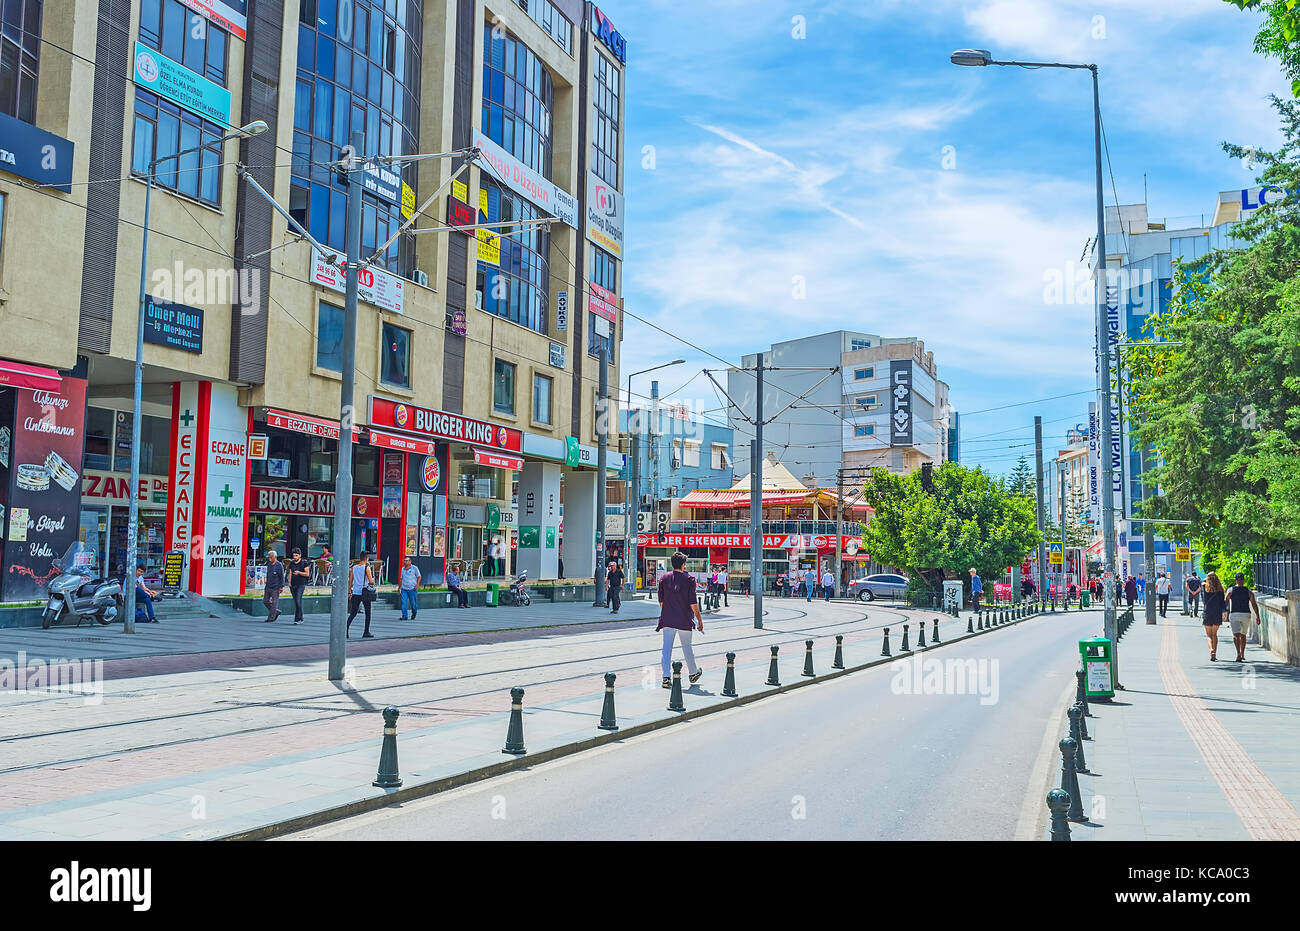 ANTALYA, TURKEY - MAY 12, 2017: The wide avenue in modern district, full of stores, malls and fast food cafes, on May 12 in Antalya. Stock Photo